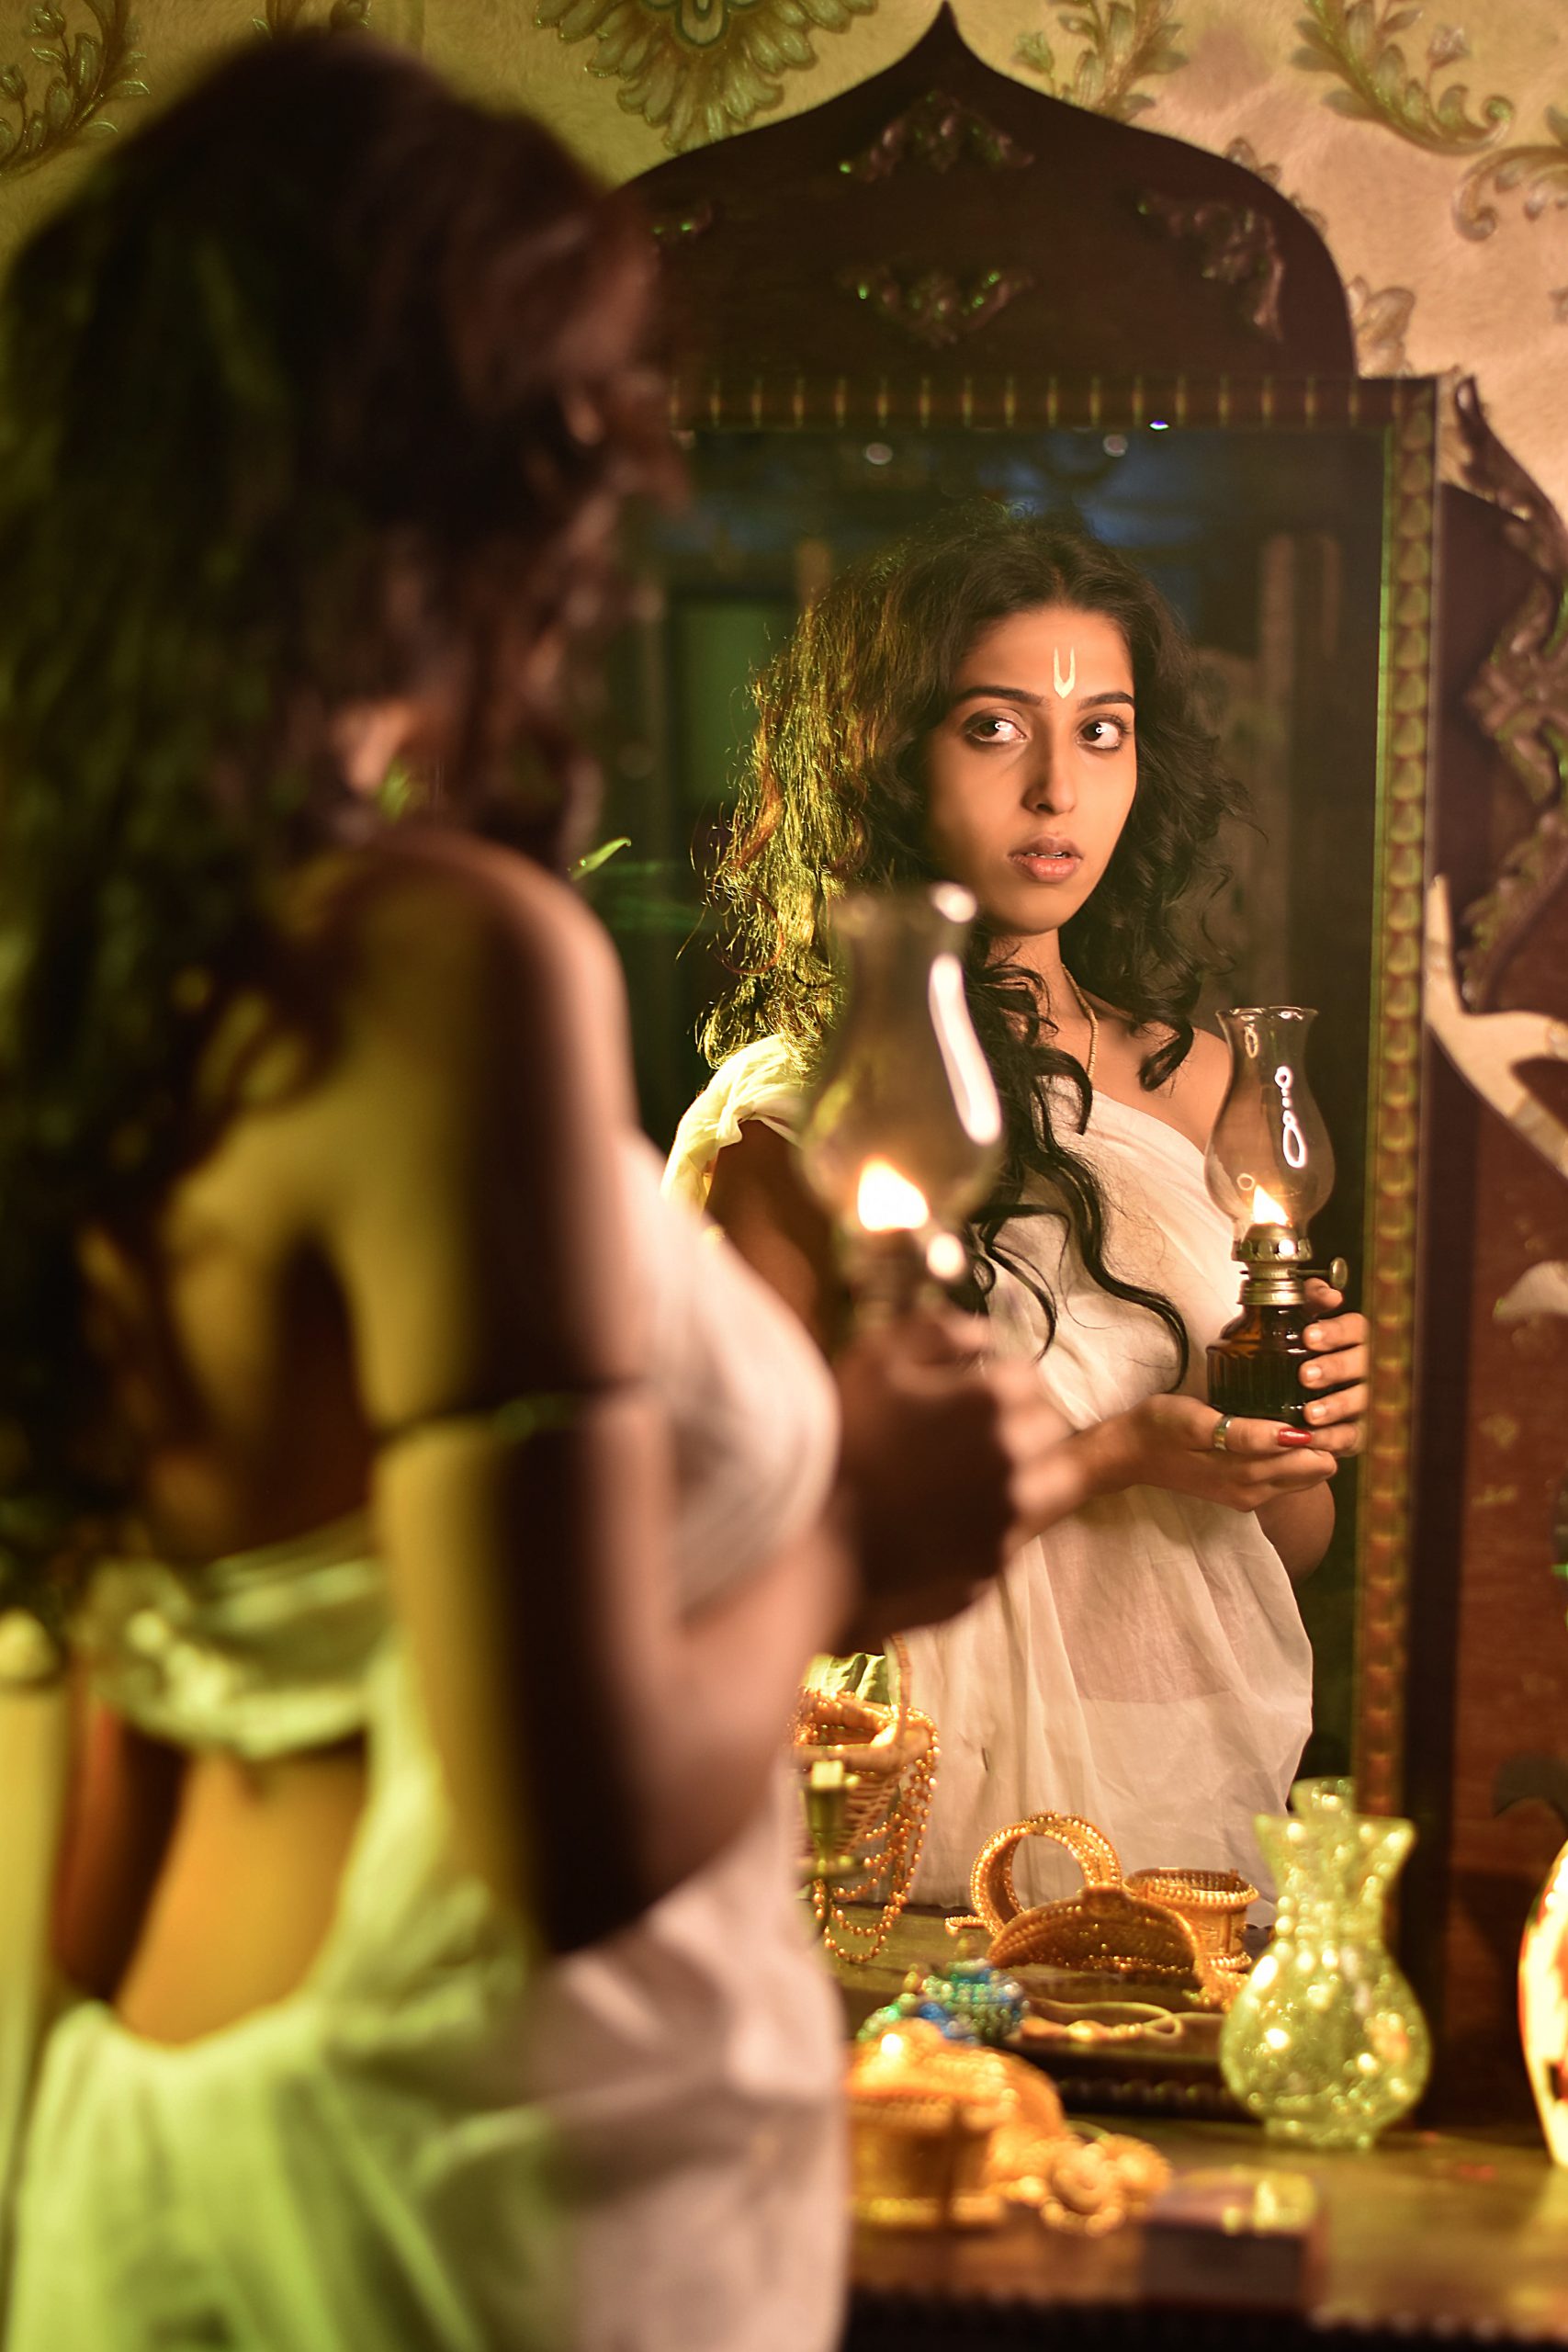 Girl in saree in front of mirror